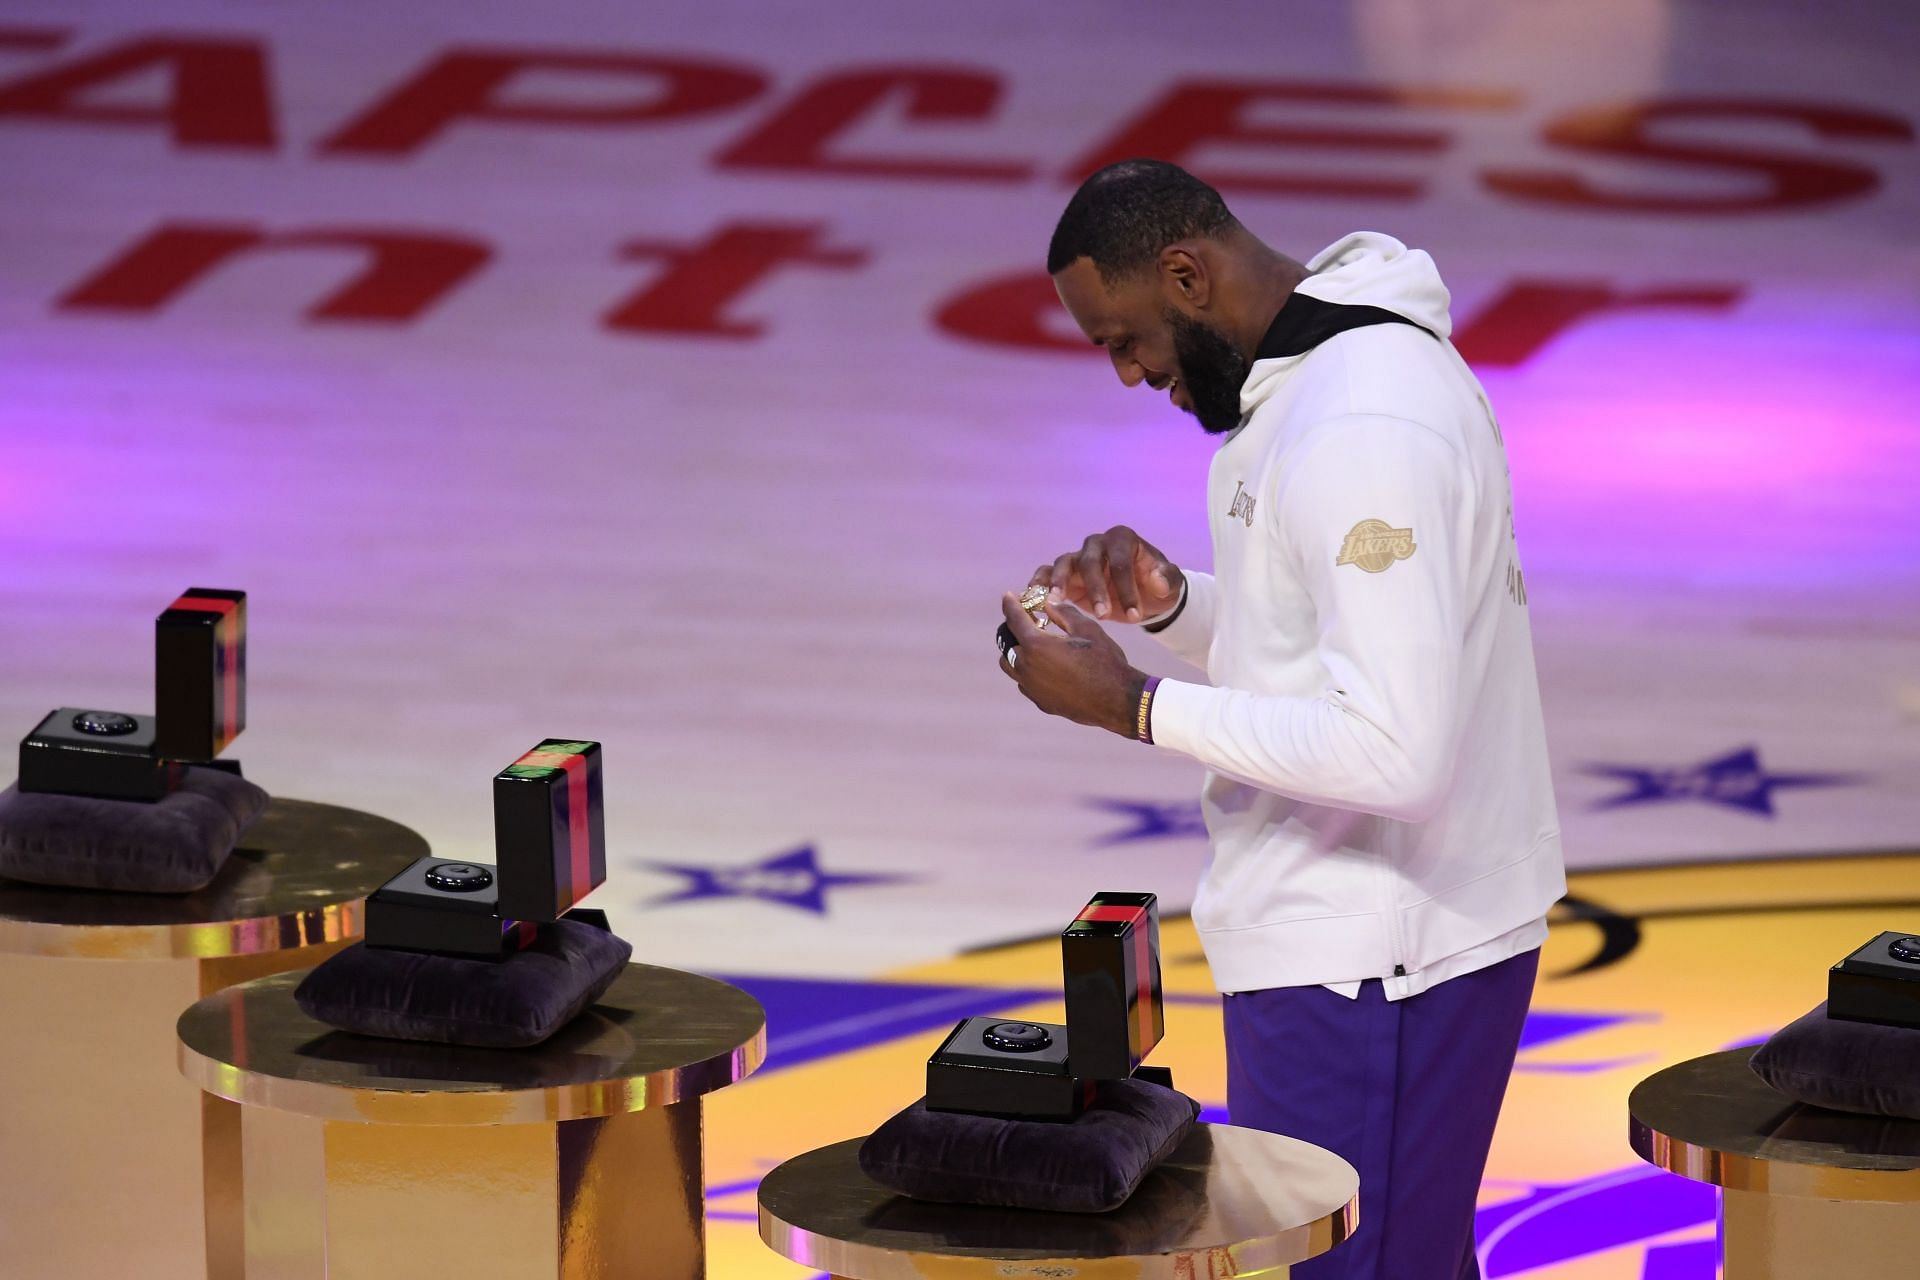 LeBron James #23 of the Los Angeles Lakers reacts as he receives his 2020 NBA championship ring